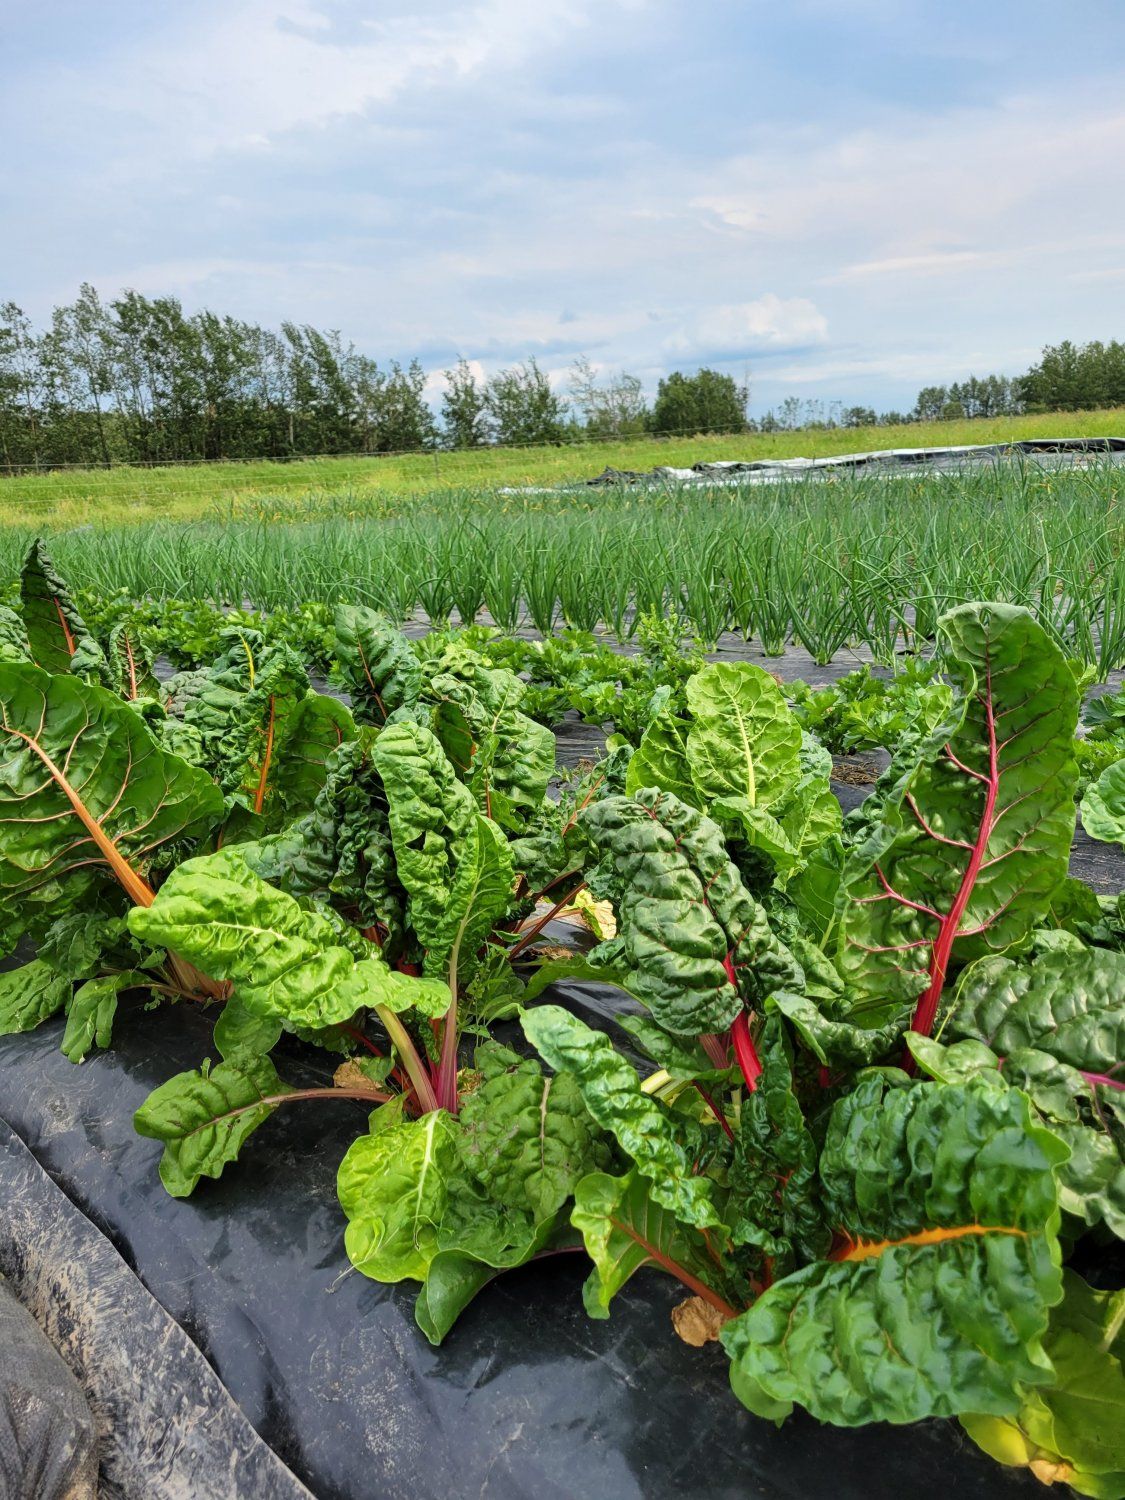 Next Happening: Farm Happenings for July 14, 2021